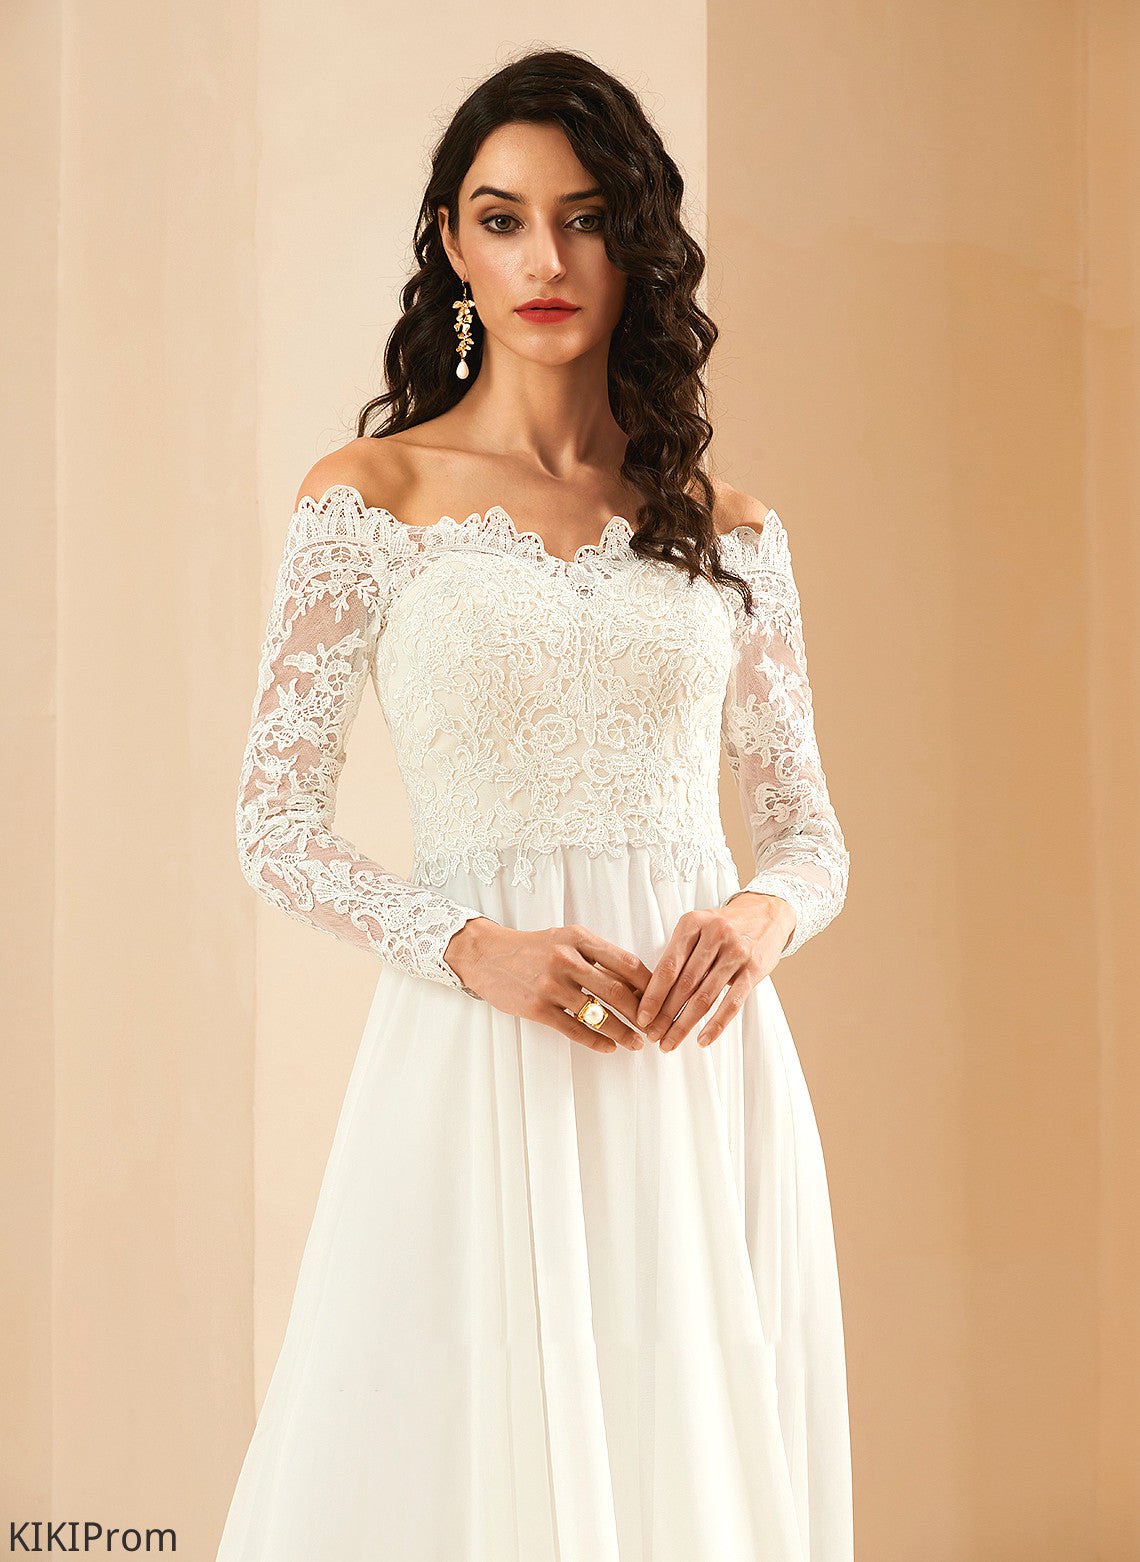 Lace Off-the-Shoulder Sweep Dress Wedding With Wedding Dresses A-Line Serenity Train